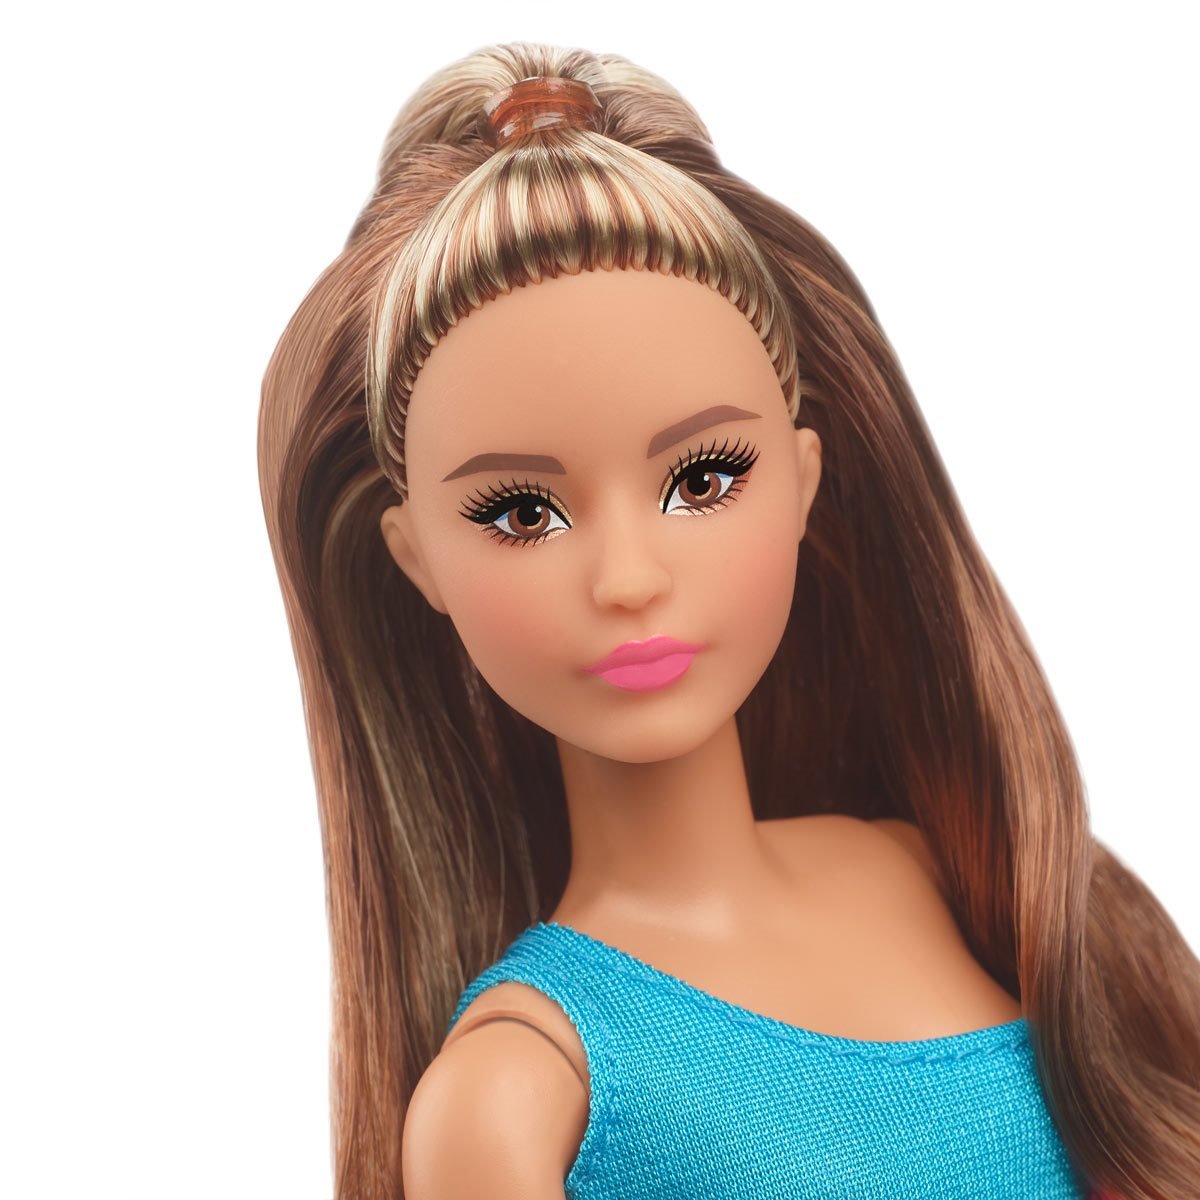  Barbie Looks Doll, Collectible & Posable with Wavy